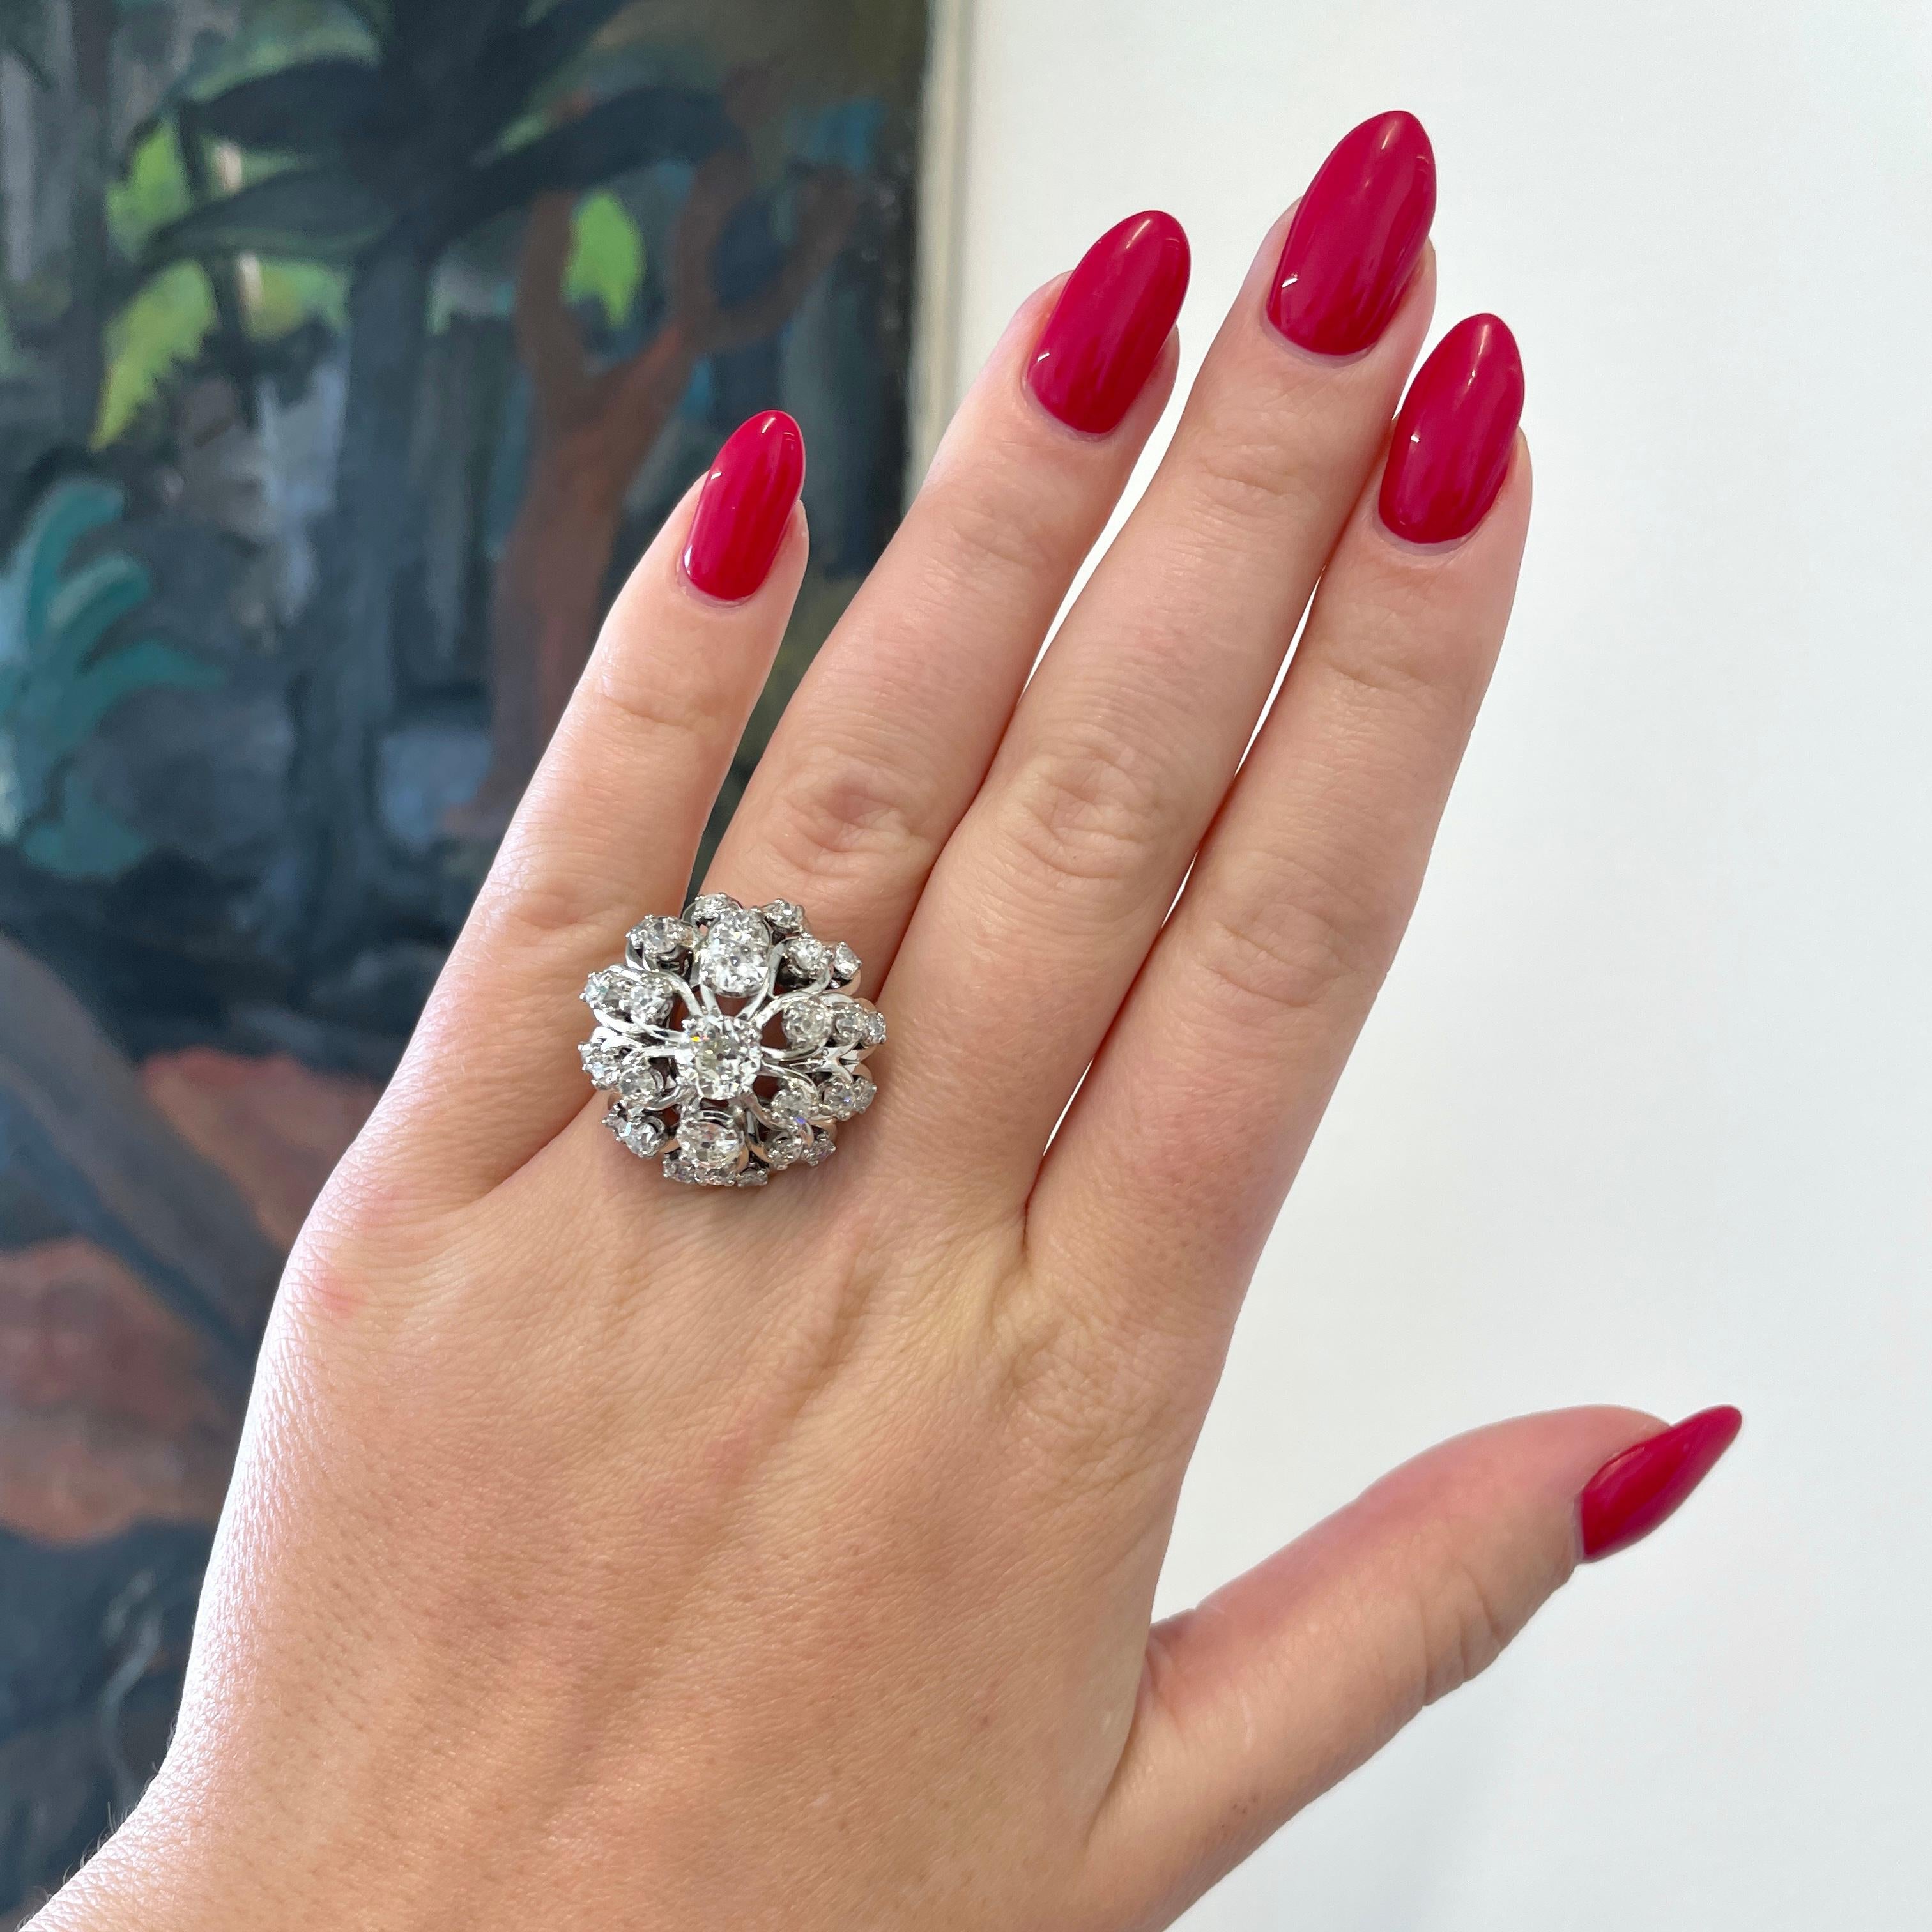 This Vintage French Retro GIA 1.09 carat Diamond Platinum Ring is the perfect way to tell your loved one, how grateful you are to have them in your life. Festive and bright design of this ring is extremely eye-catching and attractive. The center